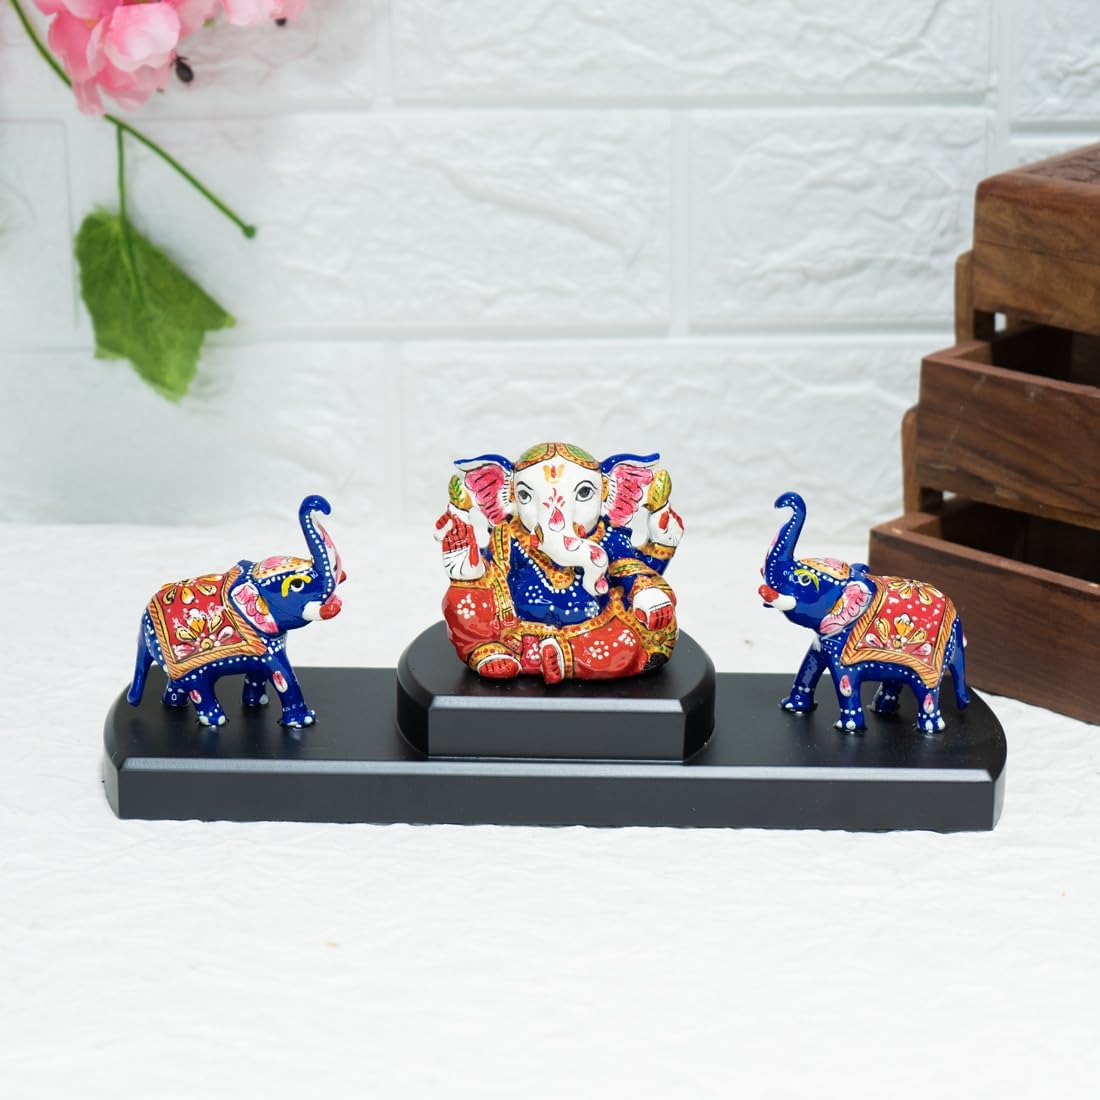 Gleevers X Ekhasa Metal Show Pieces for Home Decor and House Warming Gifts for New Home | Gift Items for Showcase or TV Unit Decoration |Return Gifts for House Warming Ceremony (Elephant Showpiece)